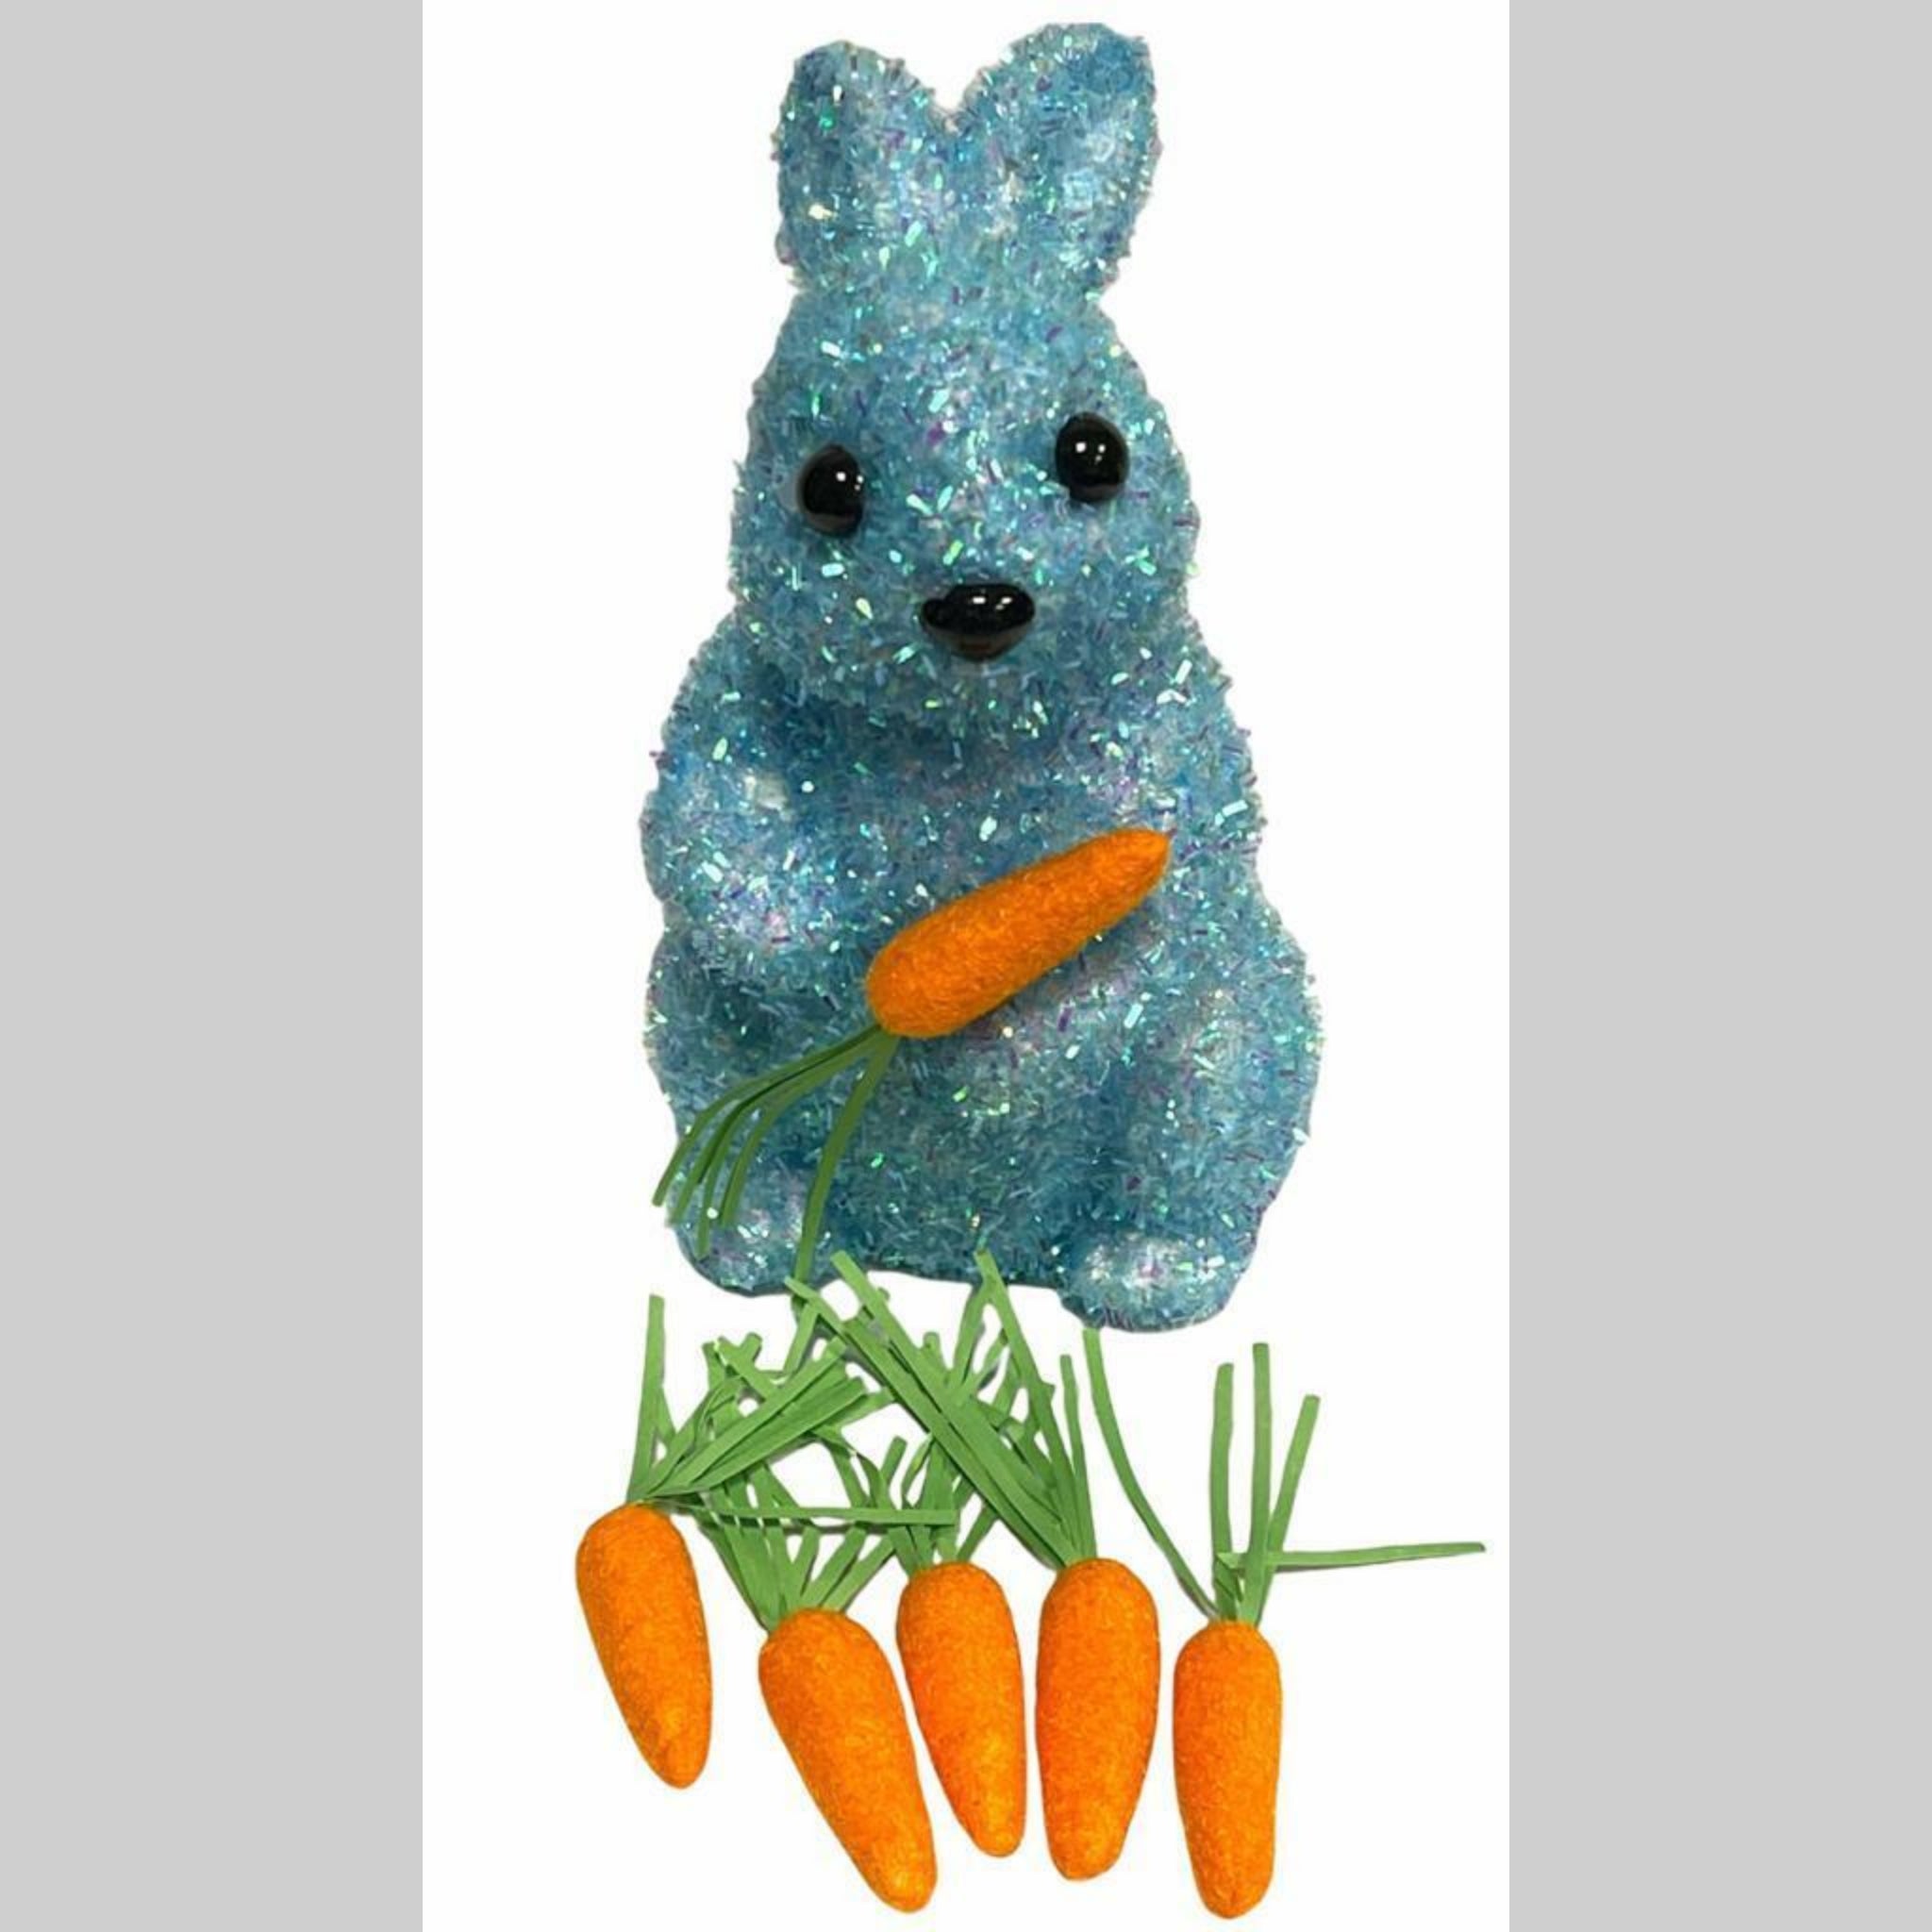 Beclen Harp 6" Easter Tinsel Shimmer/Glitter Bunny/Rabbit With Mini Carrot Party/Desk Decoration-Perfect For Easter Gift